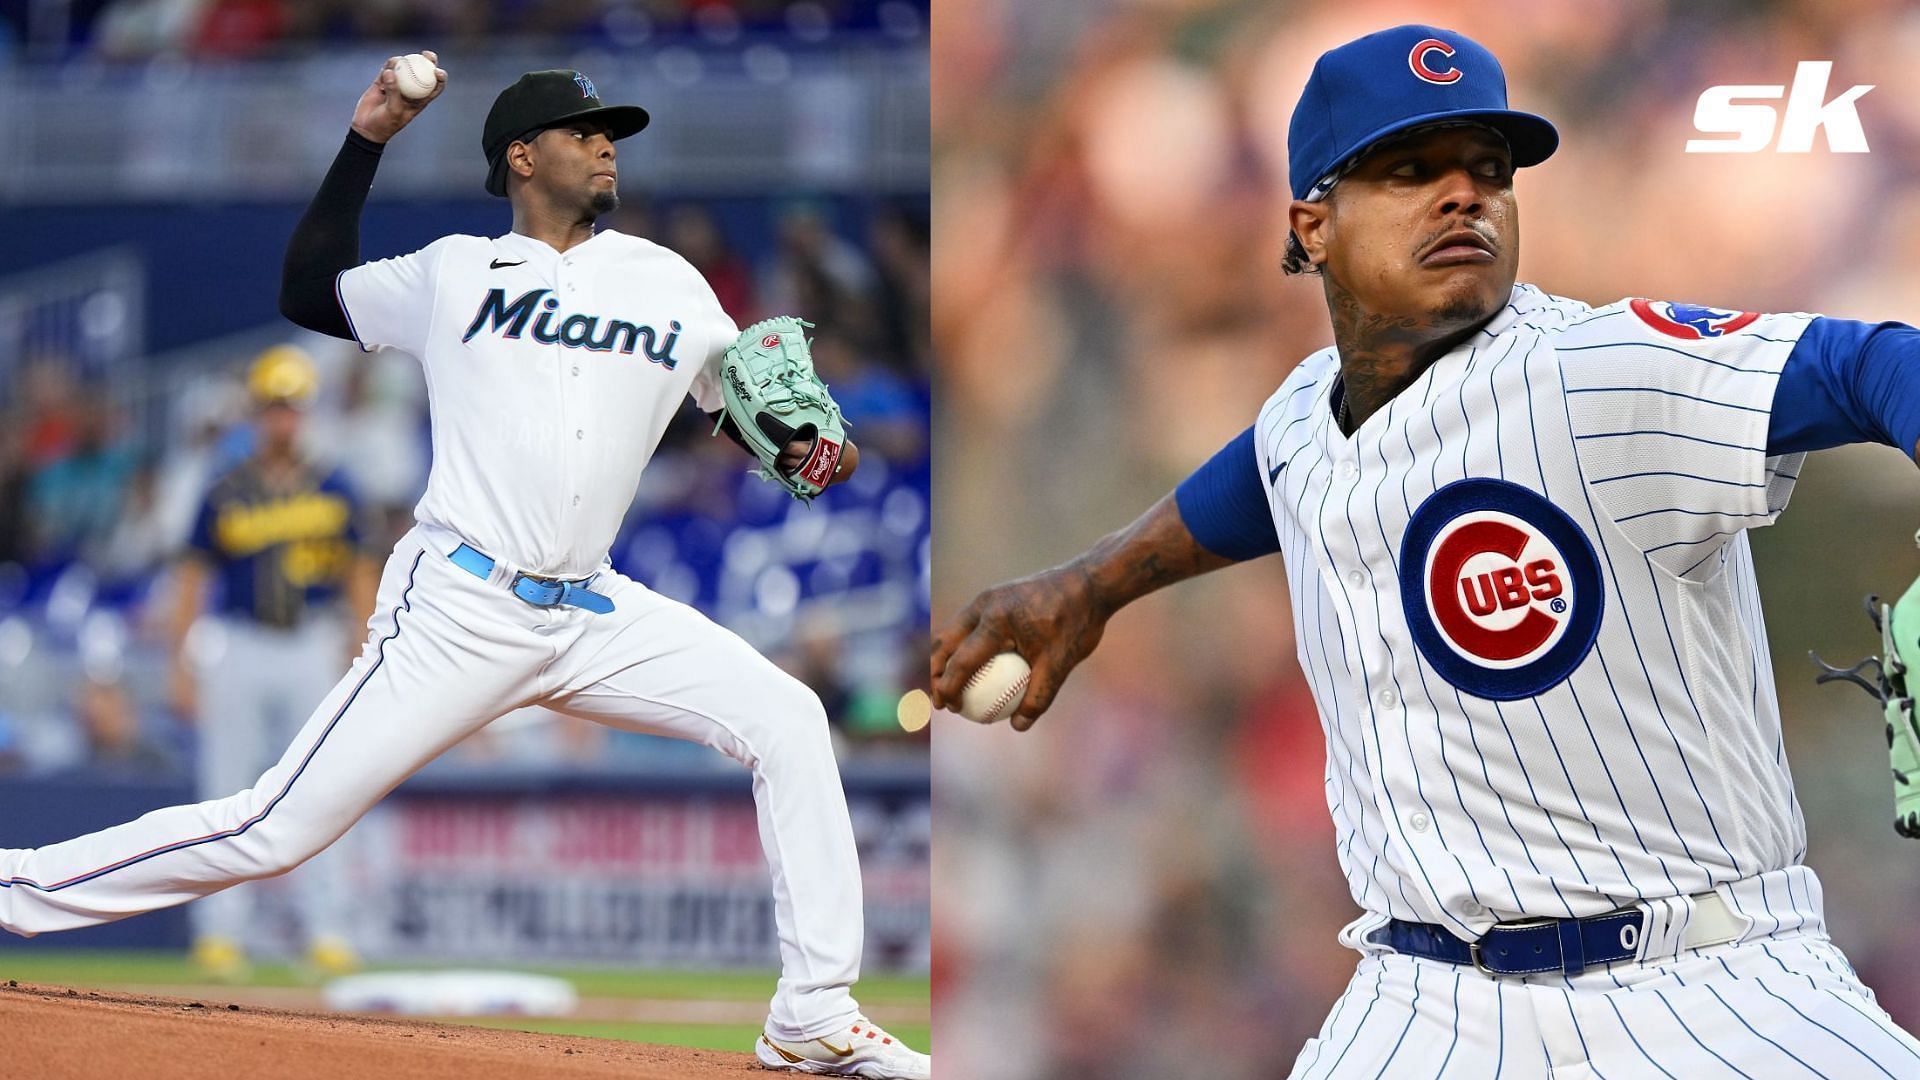 Marcus Stroman and Edward Cabrera are two late round pitchers to target in MLB fantasy drafts